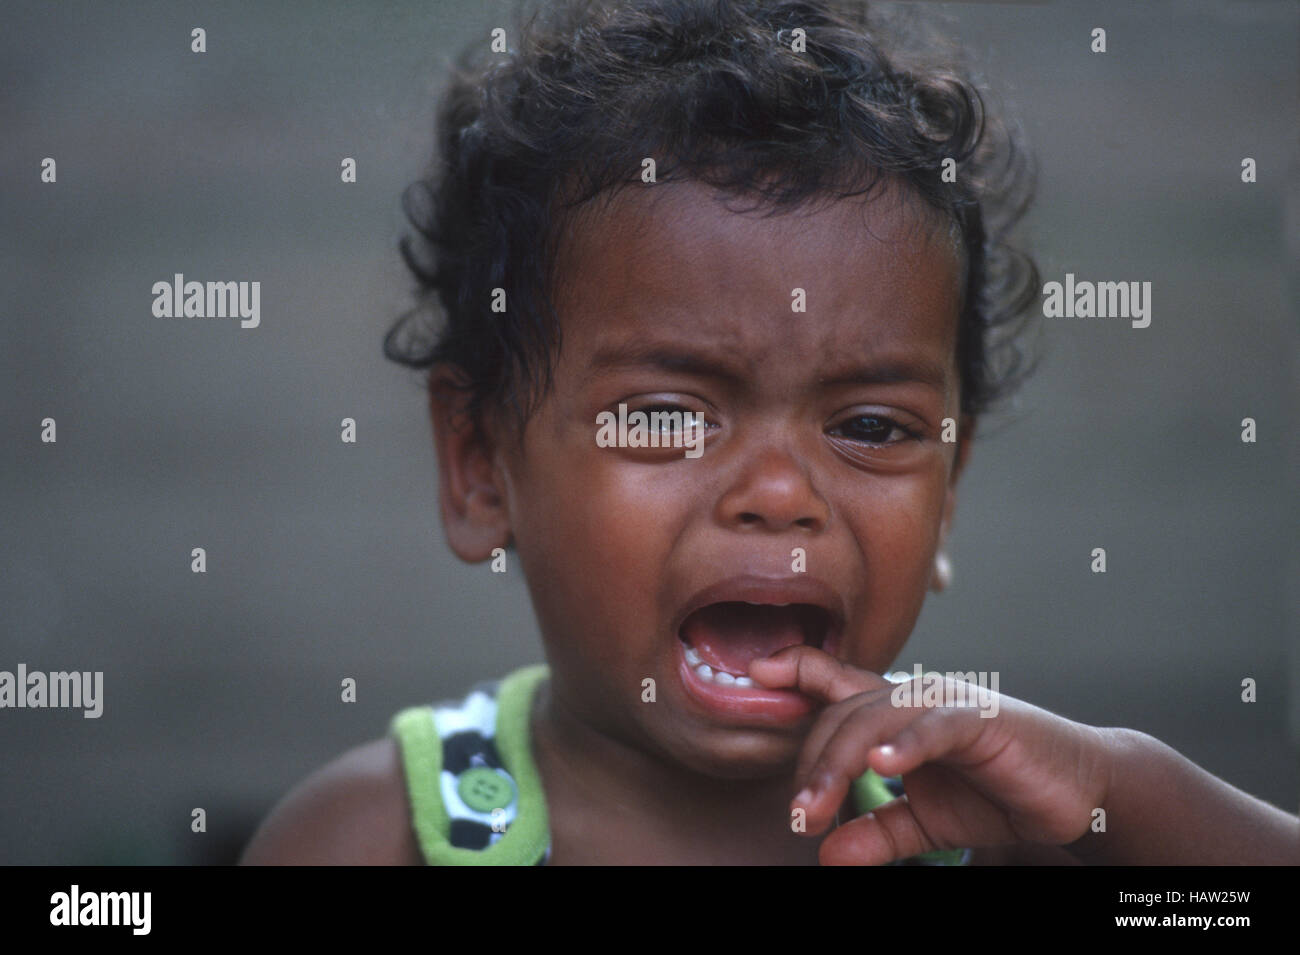 Young boy crying Stock Photo